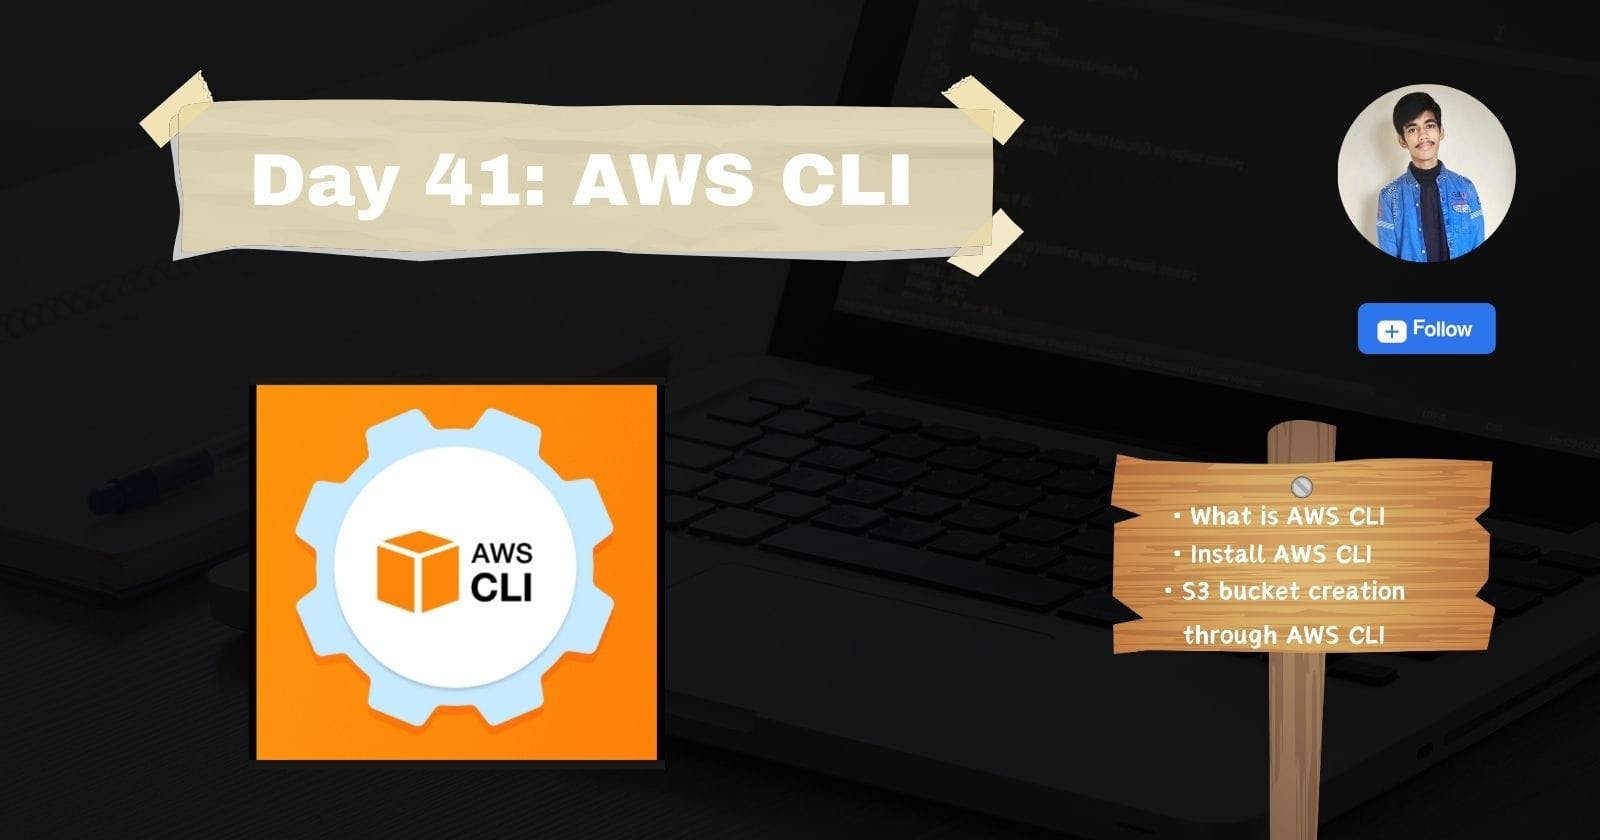 Day 41: AWS CLI (Command line interface)